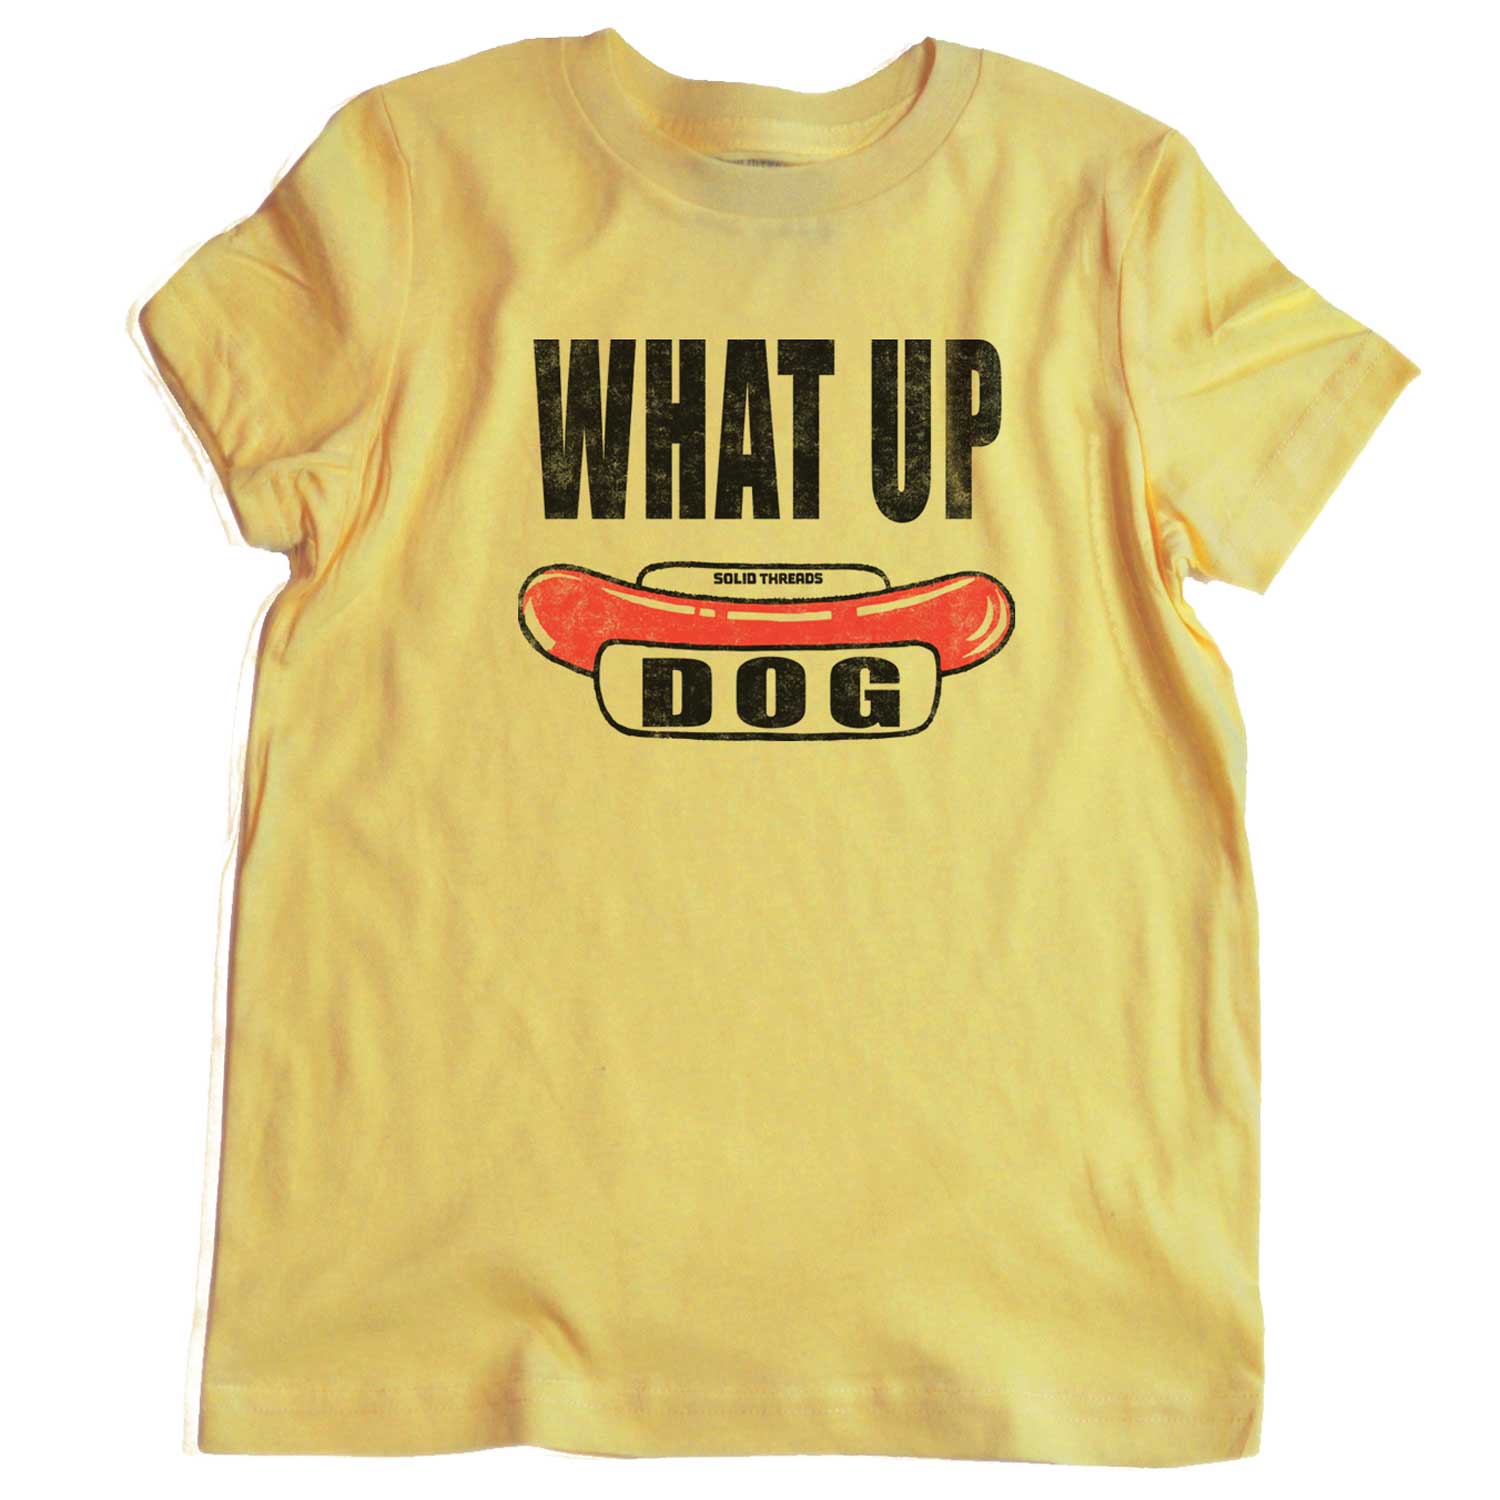 Solid Threads Kid's What Up Dog Graphic Tee | Funny Hot Dog T-Shirt Triblend Grey / Age 10